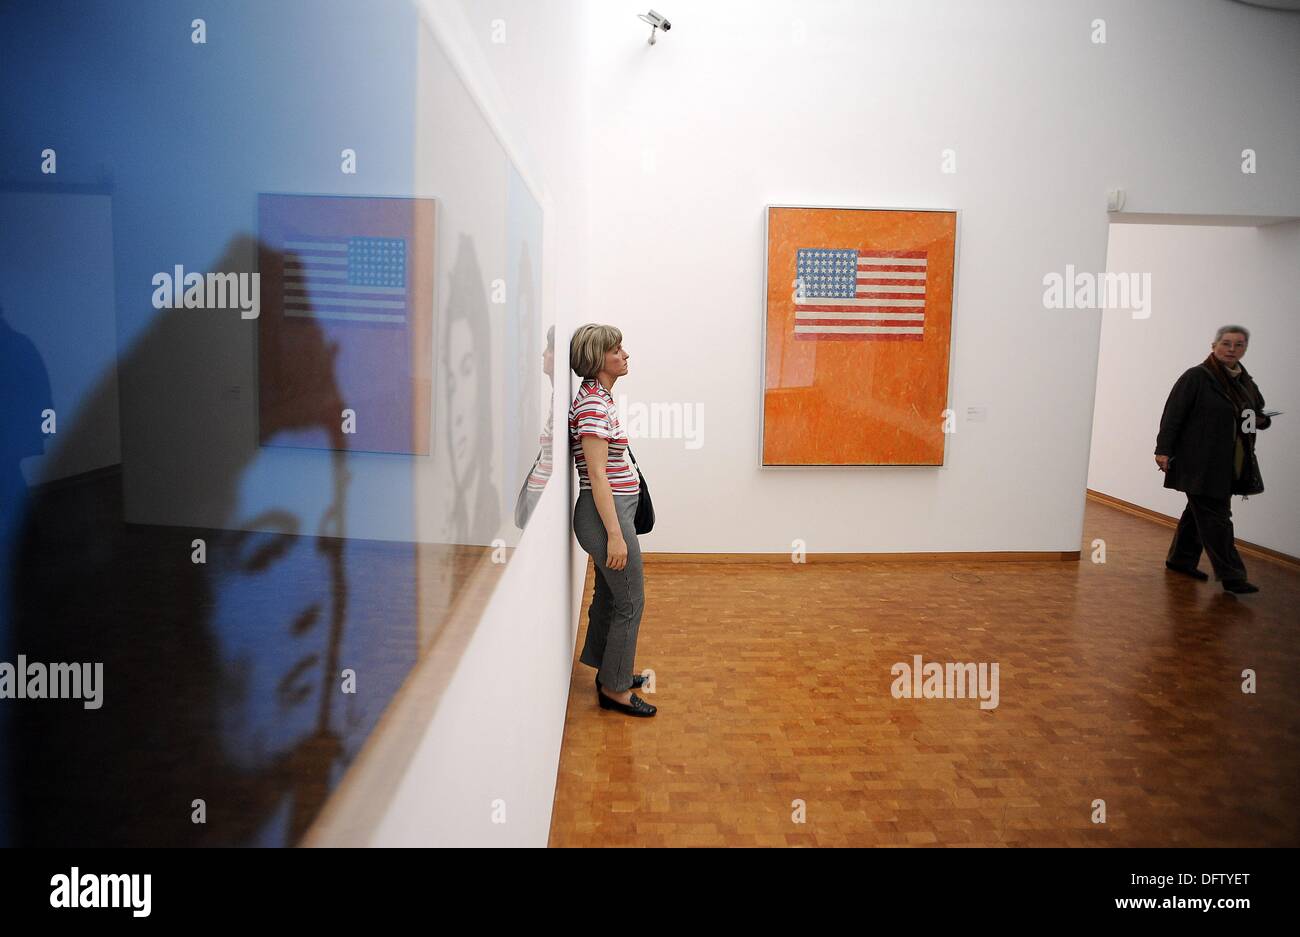 Cologne, Germany. 09th Oct, 2013. A visitor stands in the room with 'Jackie Triptych' (1964 - L) by Andy Warhol, the figure 'Woman with Handbag' (1974 - C) by Duane Hanson and 'Flag on Orange Field' (1959, R) by Jasper Johns during the preview of the new presentation of the collection under the title 'Not Yet Titled' (1964) at the Museum Ludwig in Cologne, Germany, 09 October 2013. The exhibition opens on 10 October 2013. Photo: HENNING KAISER/dpa/Alamy Live News Stock Photo